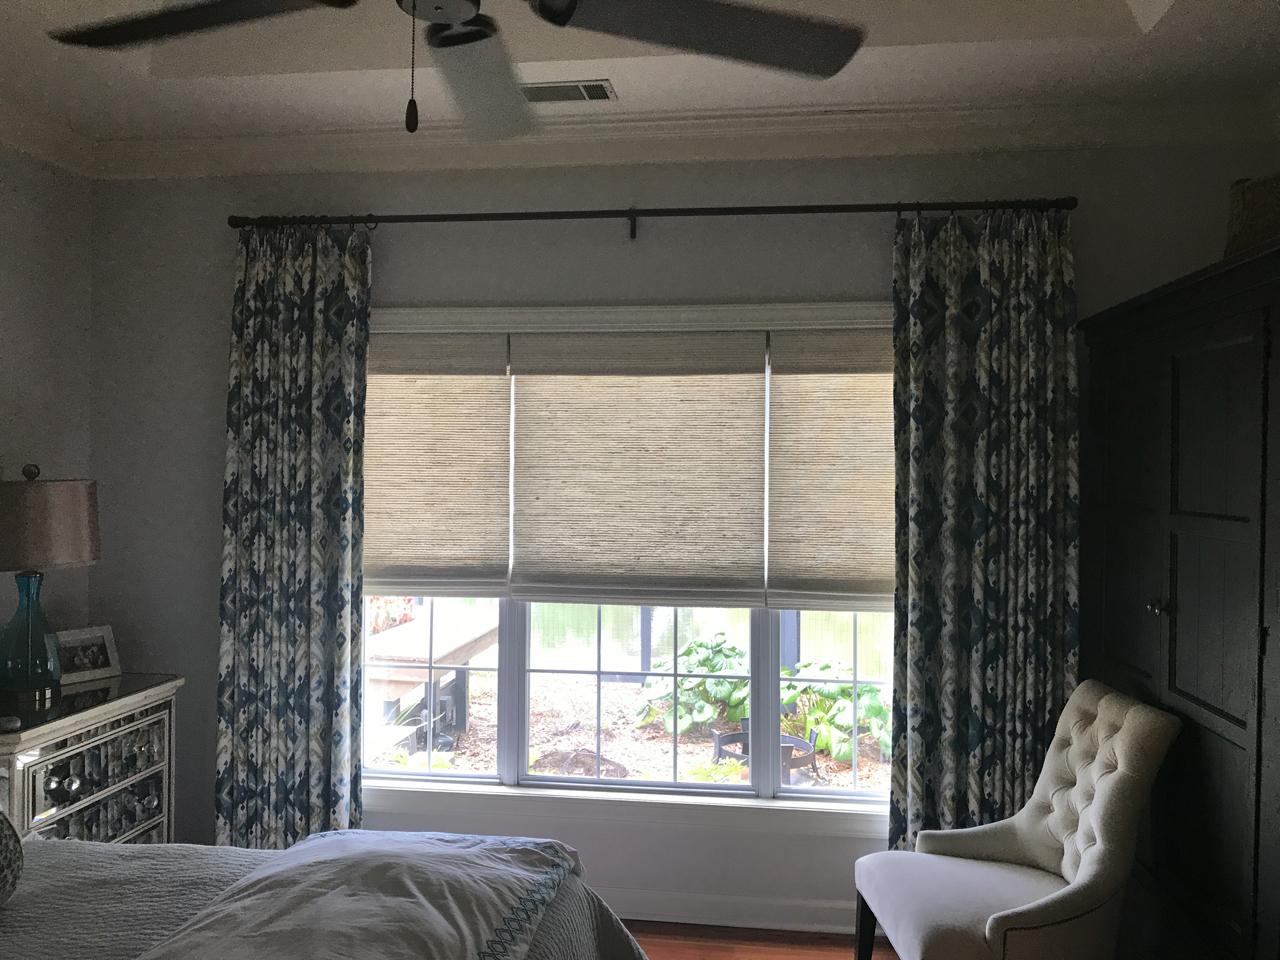 Woven wood shades in a bedroom